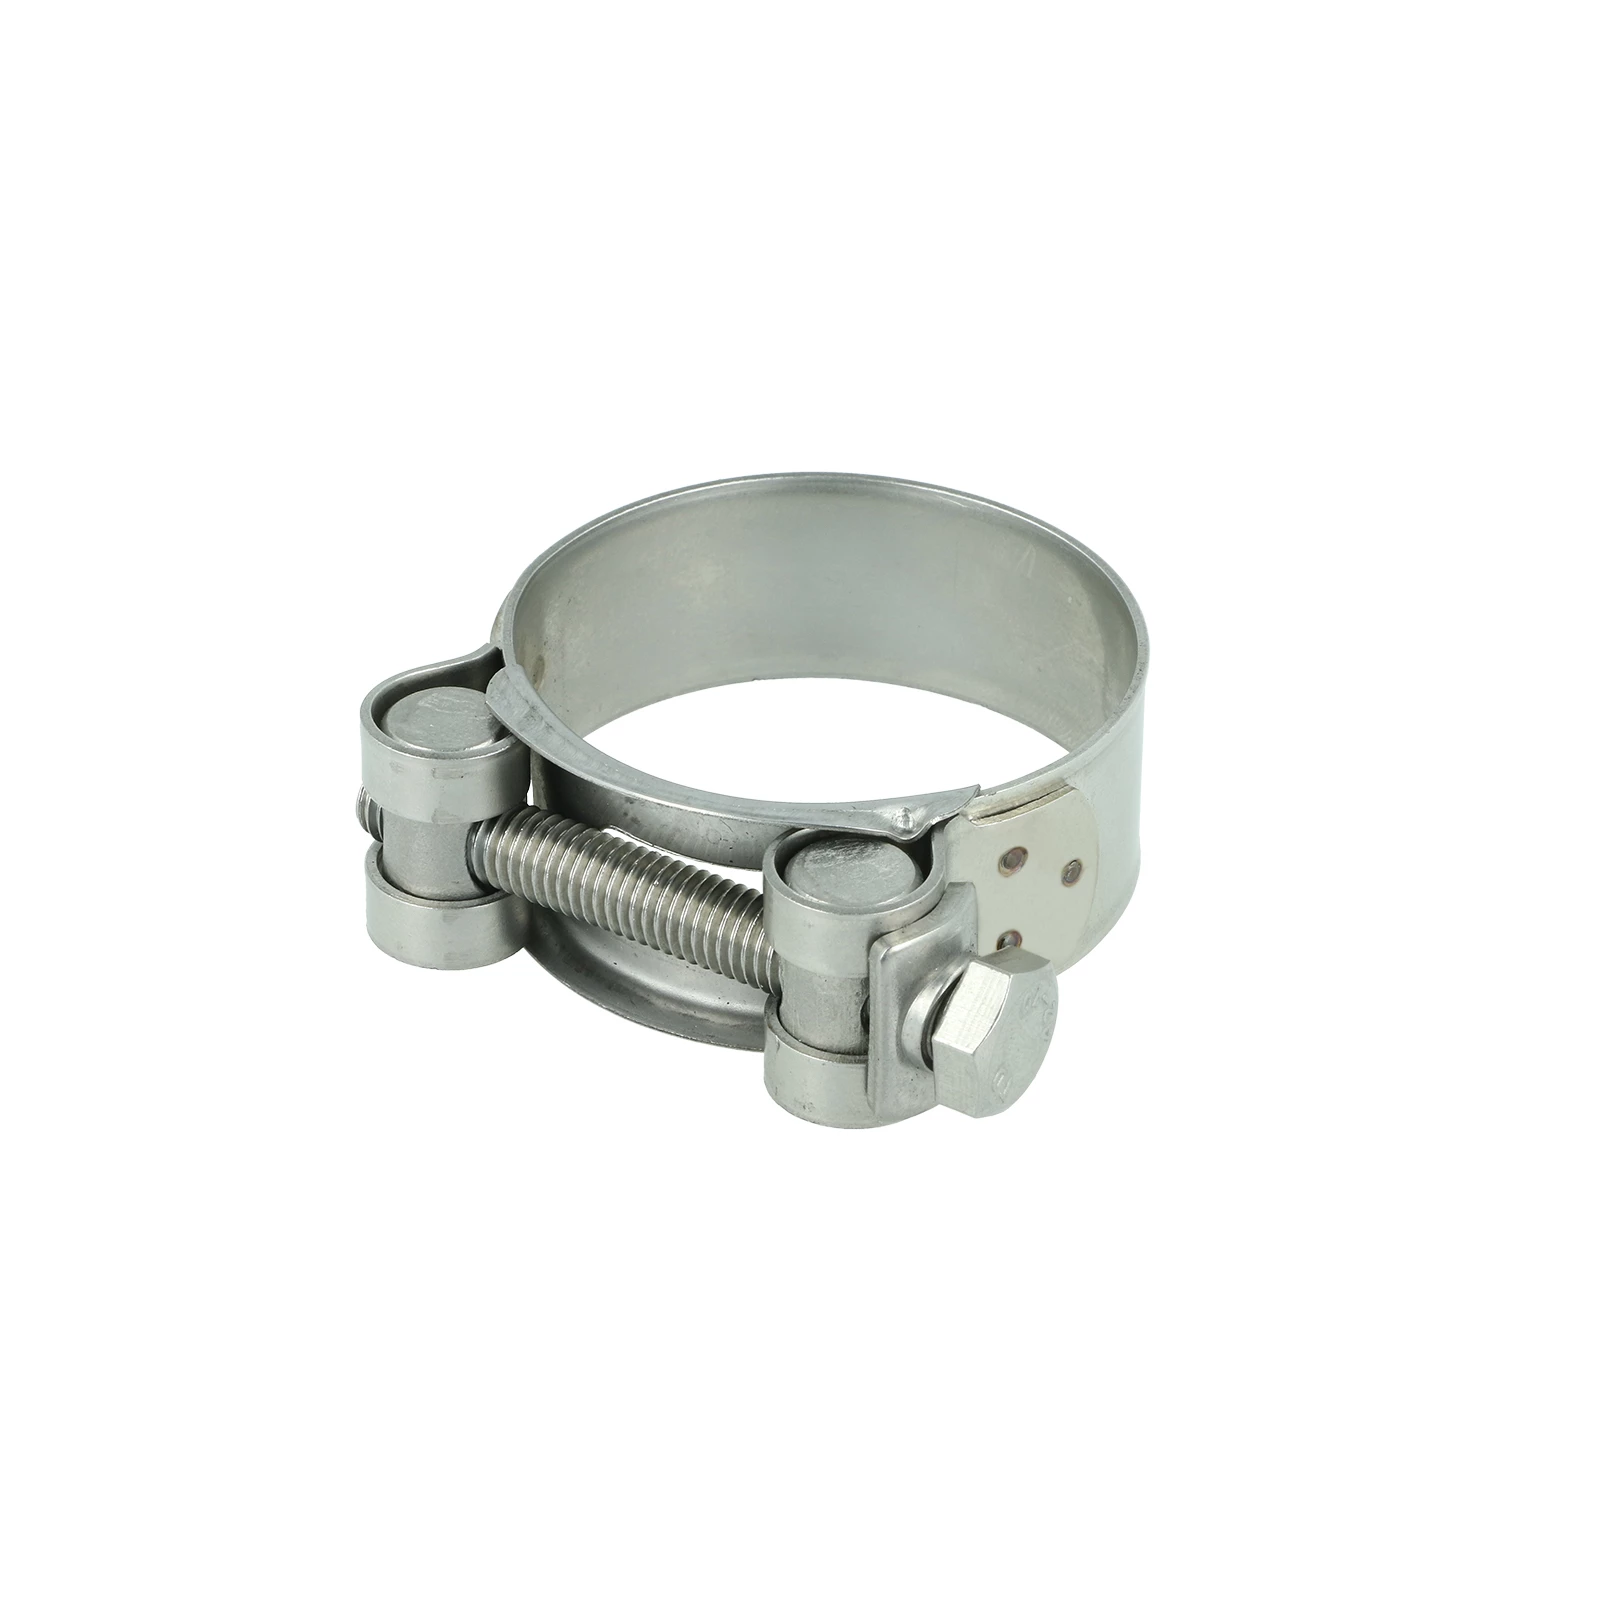 premium-heavy-duty-clamp-stainless-steel-80-85mm-boost-products.webp